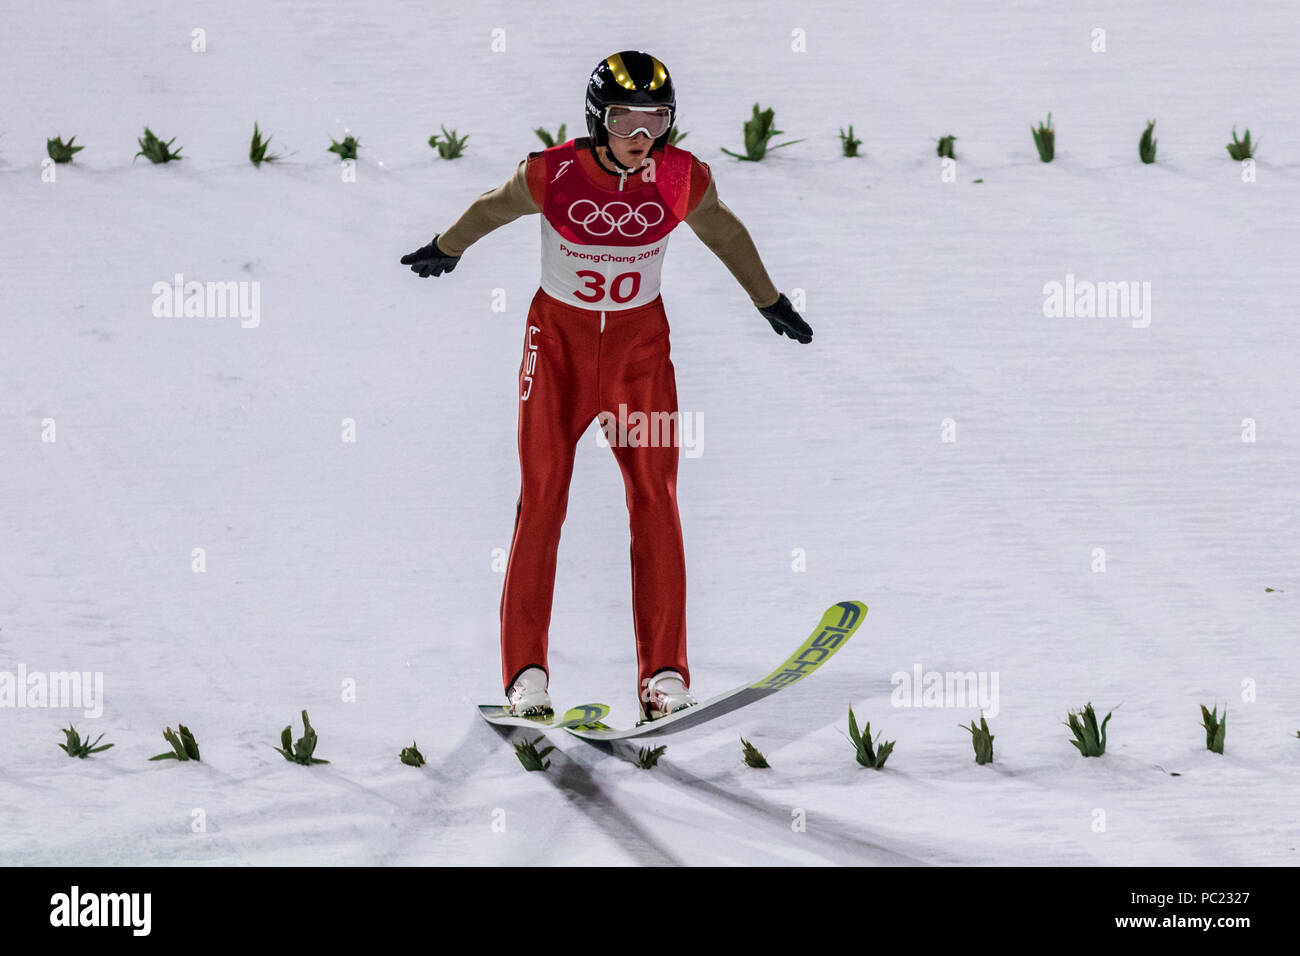 Kevin Bickner (USA) competing in the Ski Jumping Men's Normal Hill qualification round at the Olympic Winter Games PyeongChang 2018 Stock Photo